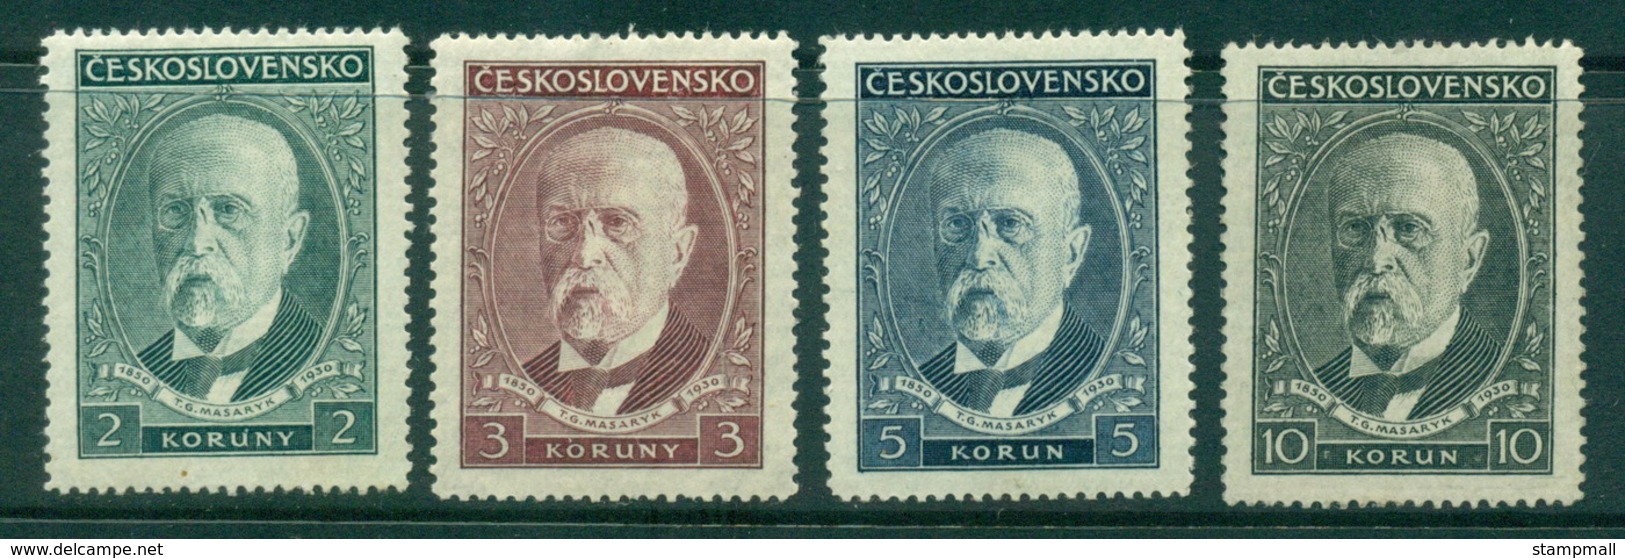 Czechoslovakia 1930 Masaryk MLH Lot38007 - Used Stamps